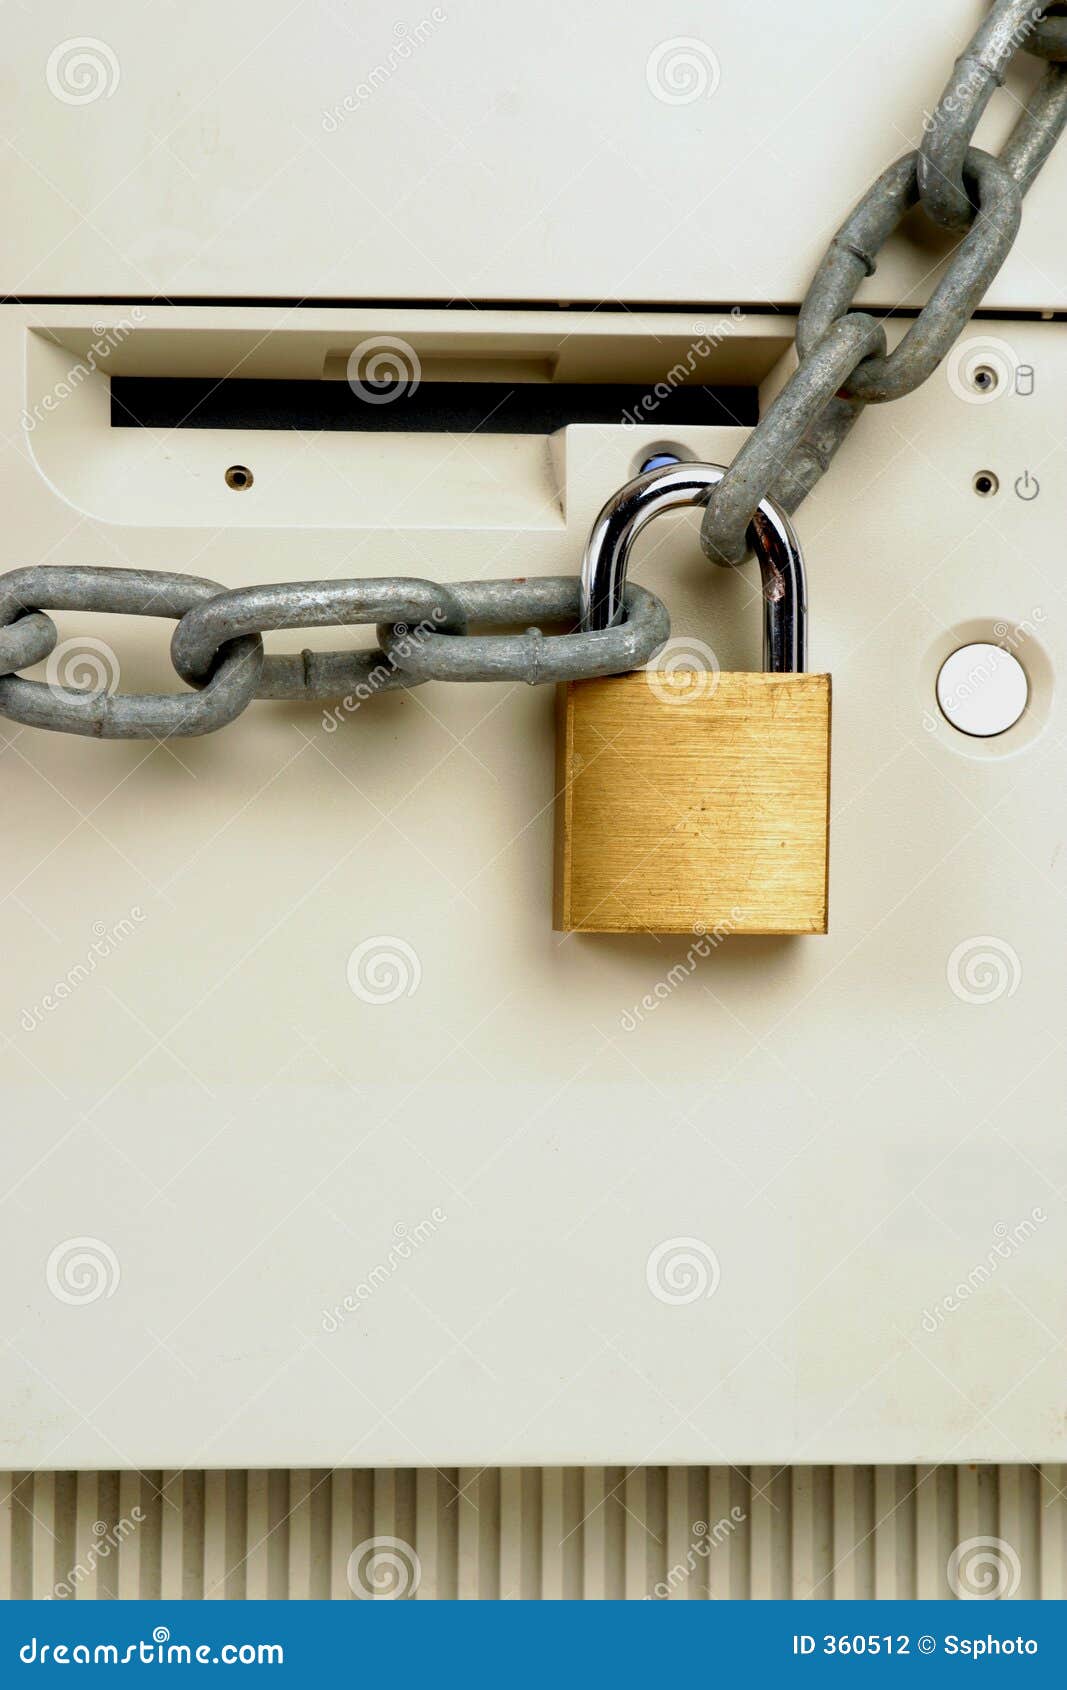 Computer locked up stock photo. Image of conceal, lock ...